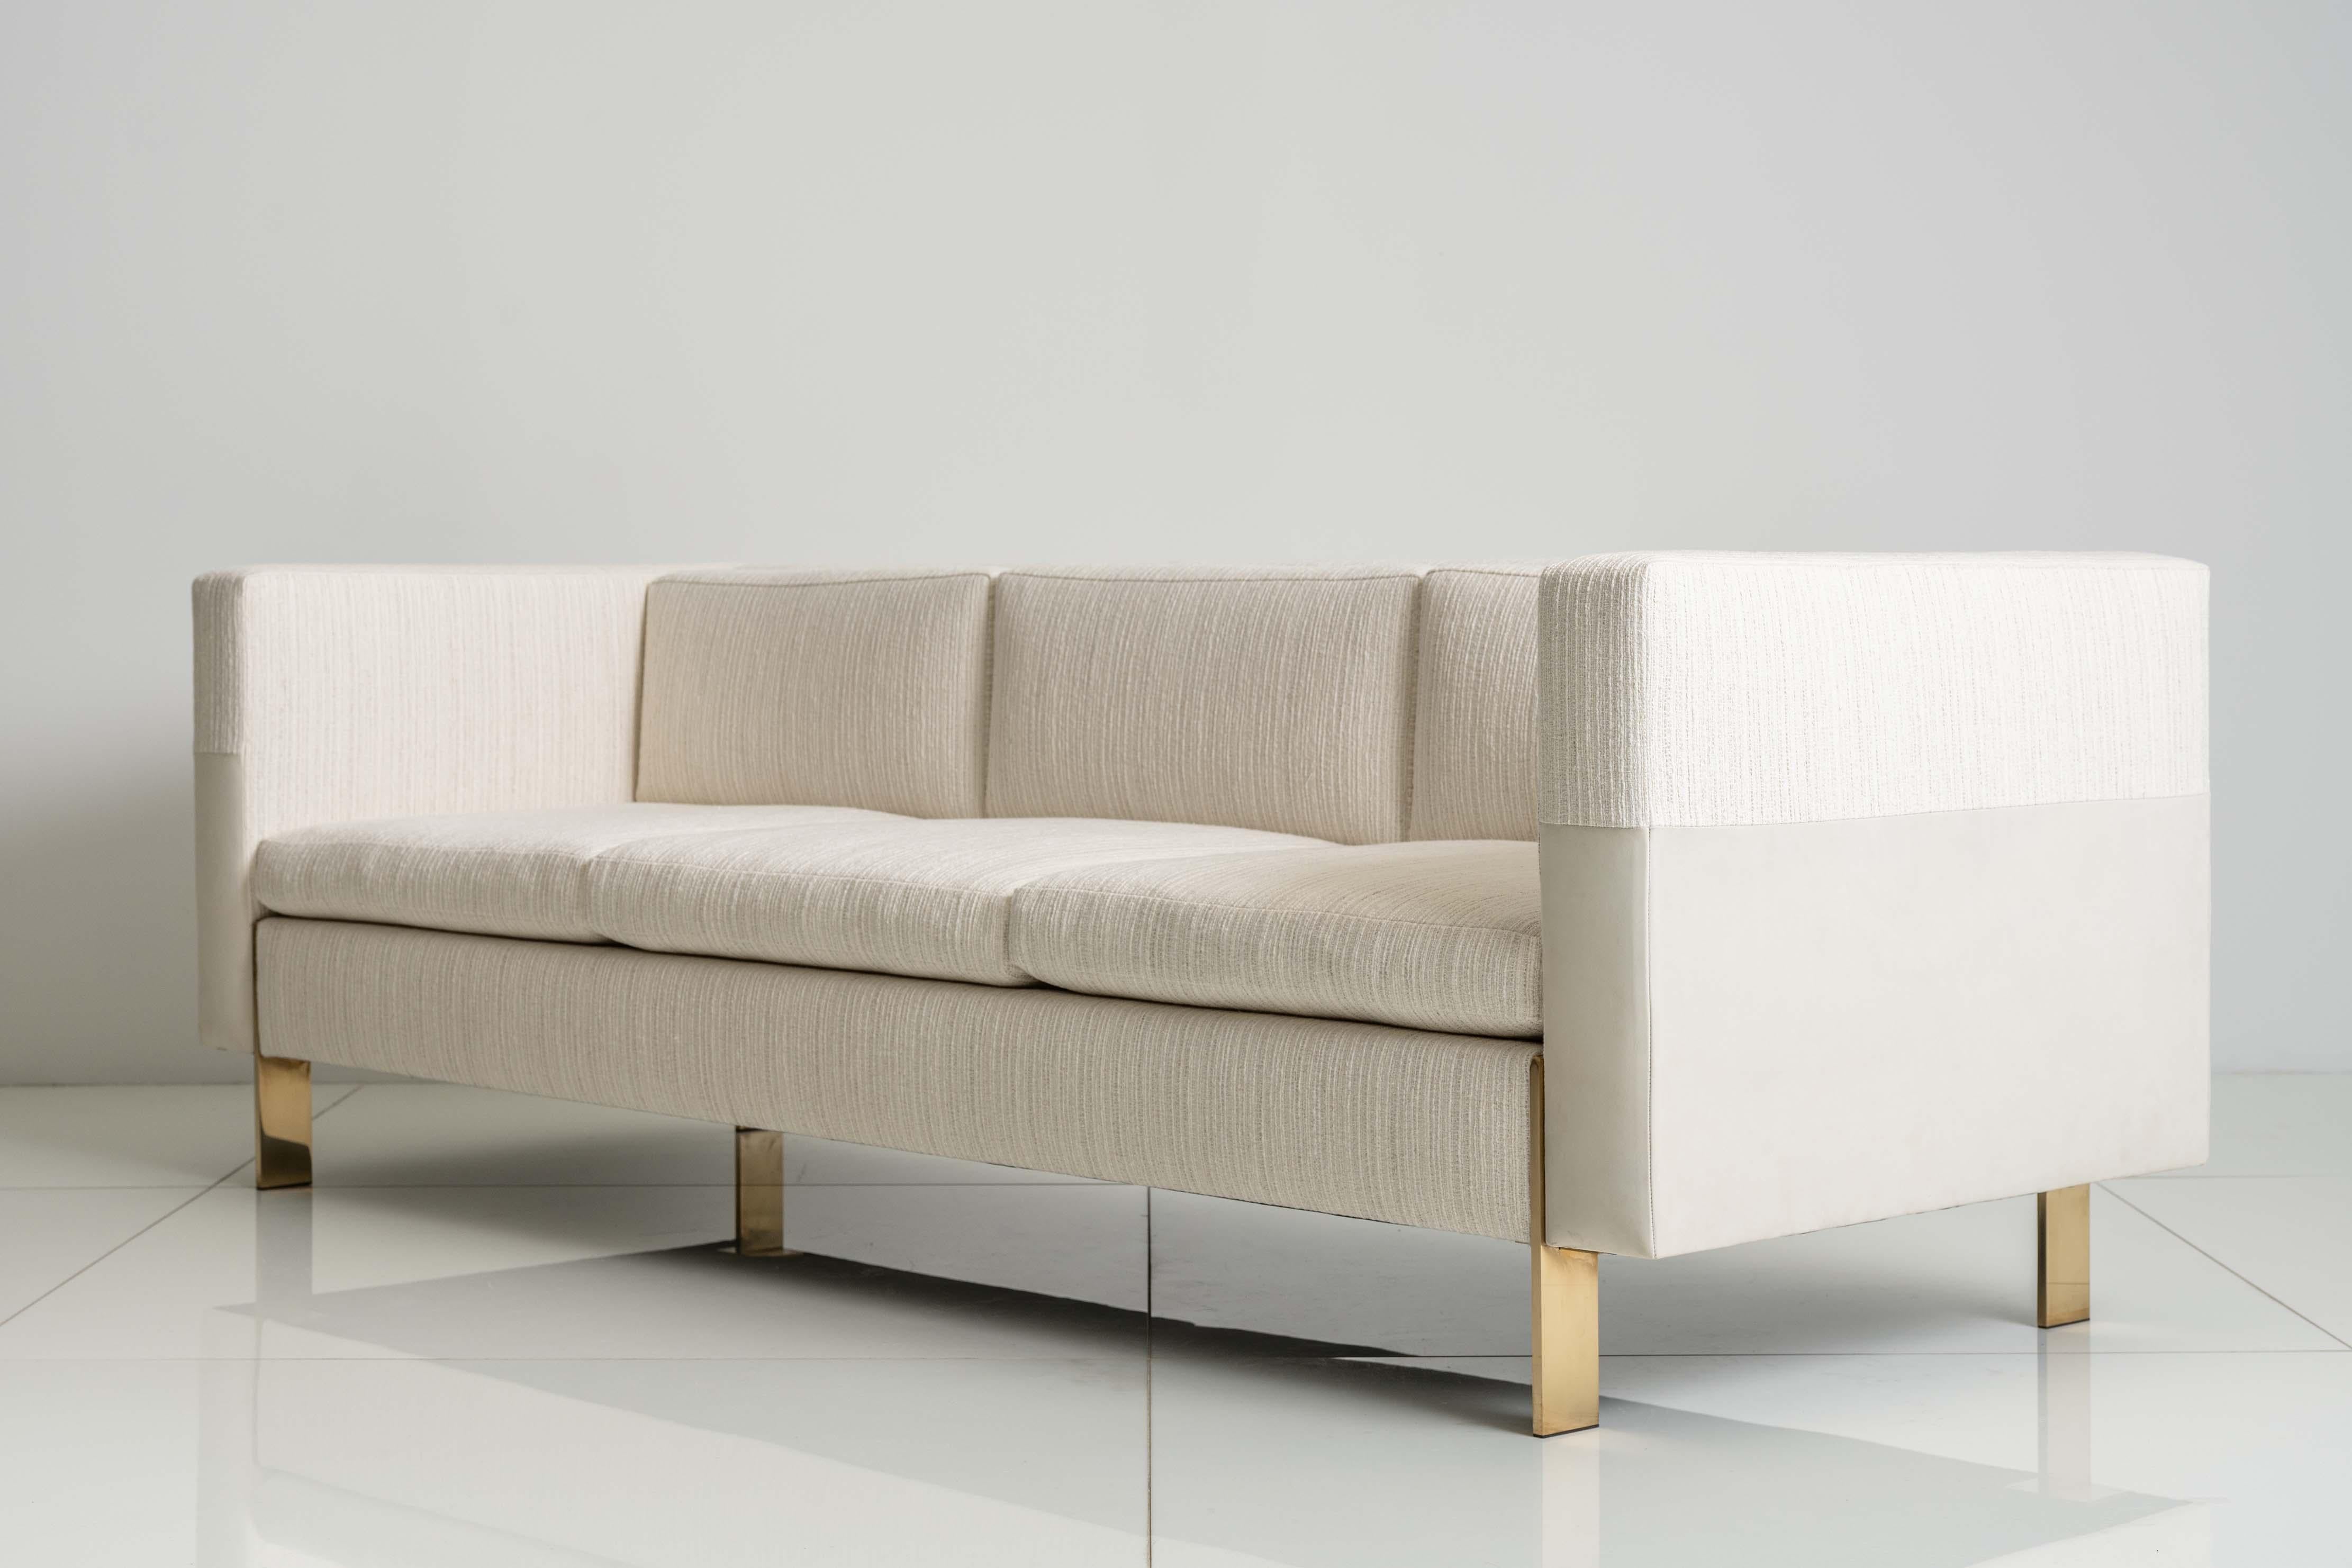 The Villaflor Sofa’s bladelike leg detail appears to pierce the upholstery, wedding the base to the seat and anchoring the whole. A second material has been introduced to the Villaflor’s exterior, creating a play of light and texture.